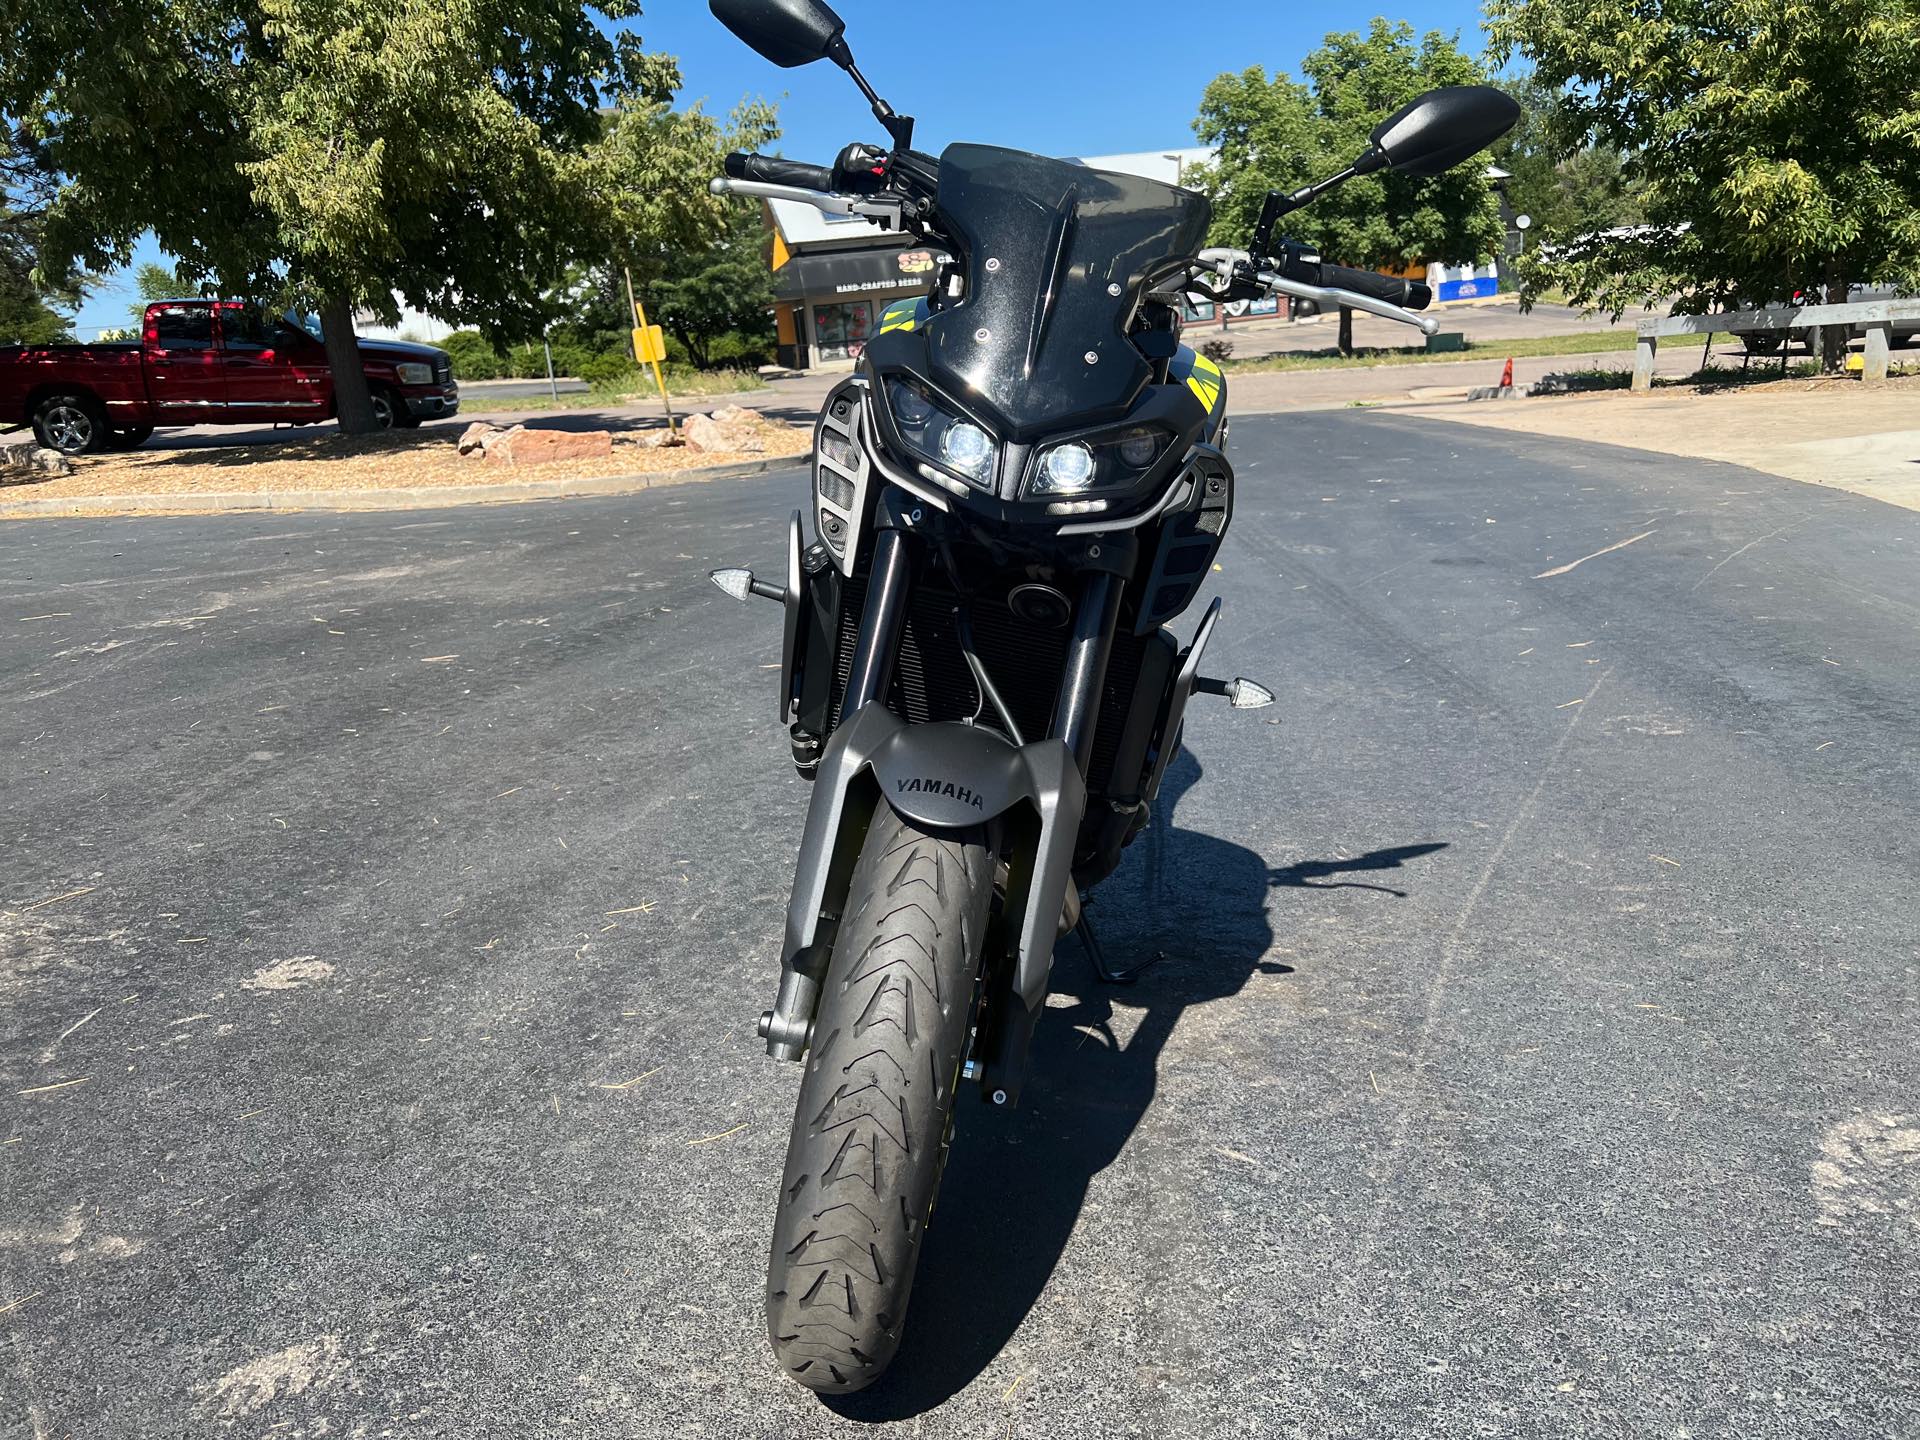 2018 Yamaha MT 09 at Aces Motorcycles - Fort Collins